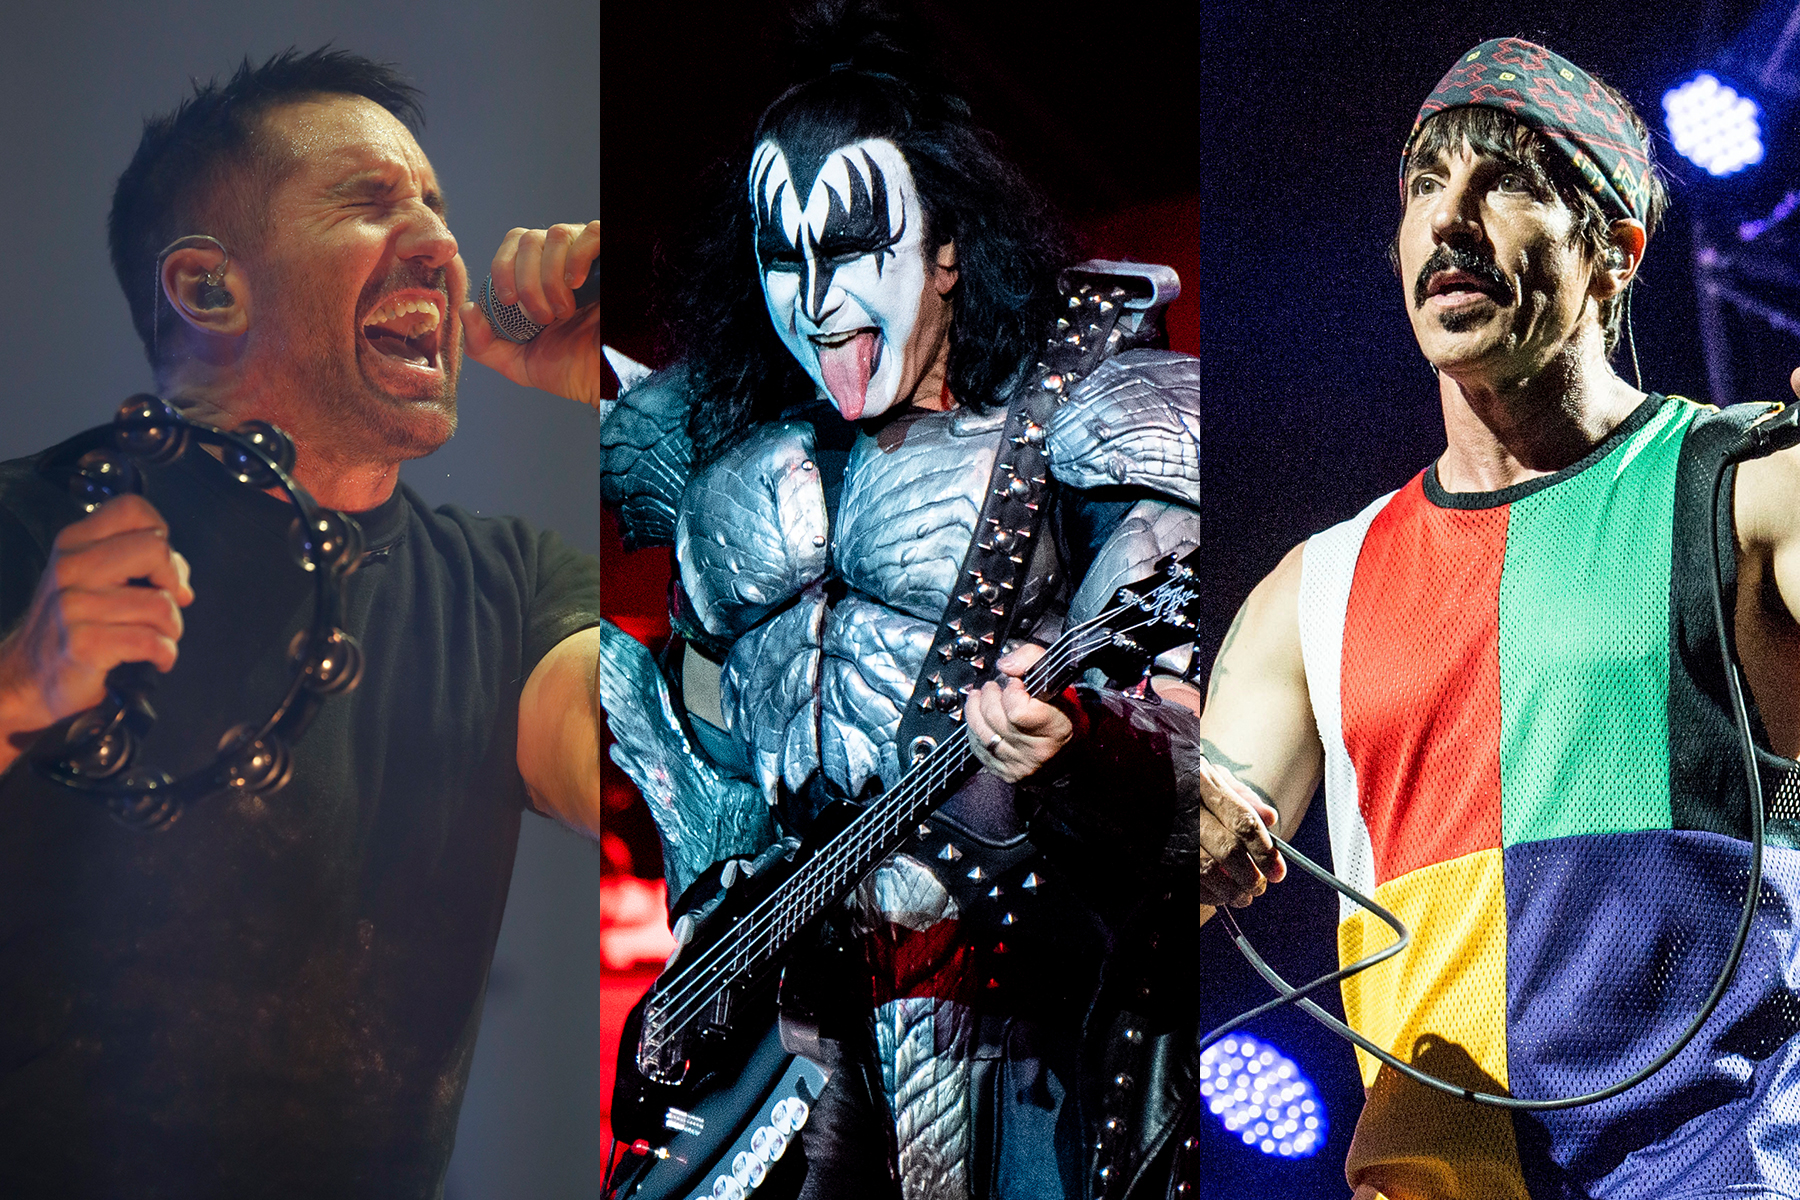 Red Hot Chili Peppers, NIN and Kiss Headline 2022 Louder than Life